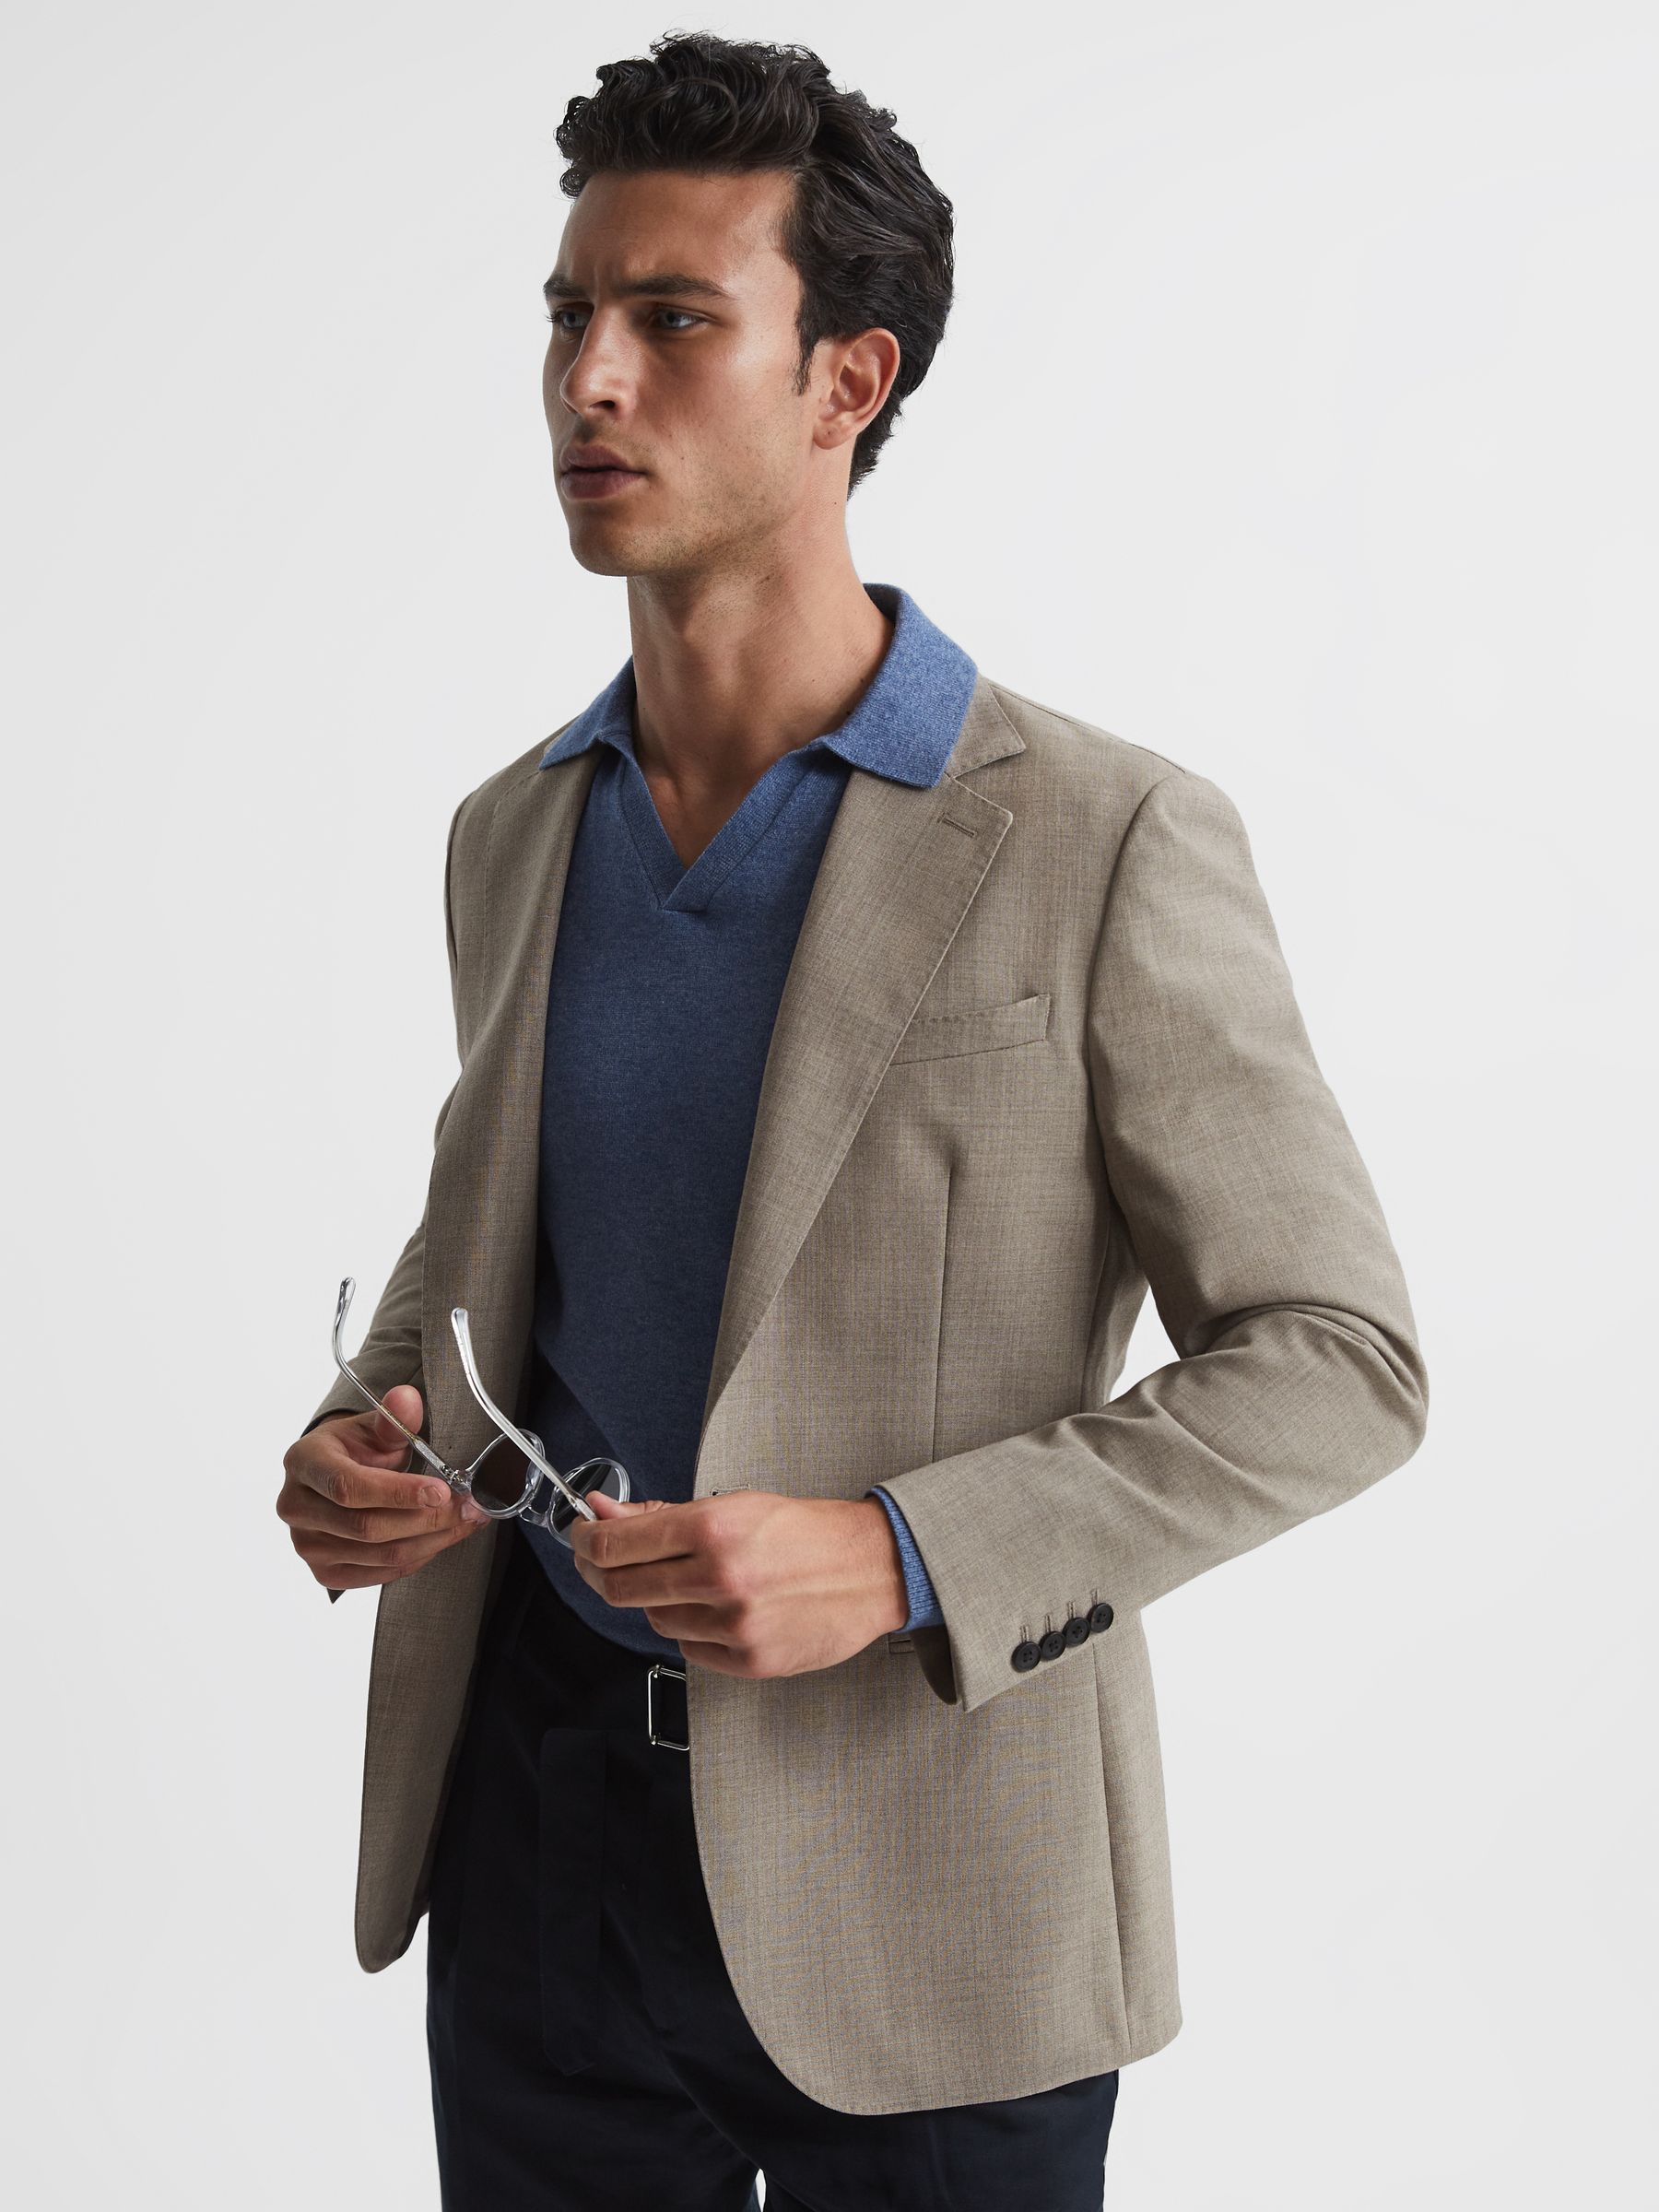 Reiss Rope Single Breasted Textured Blazer - REISS